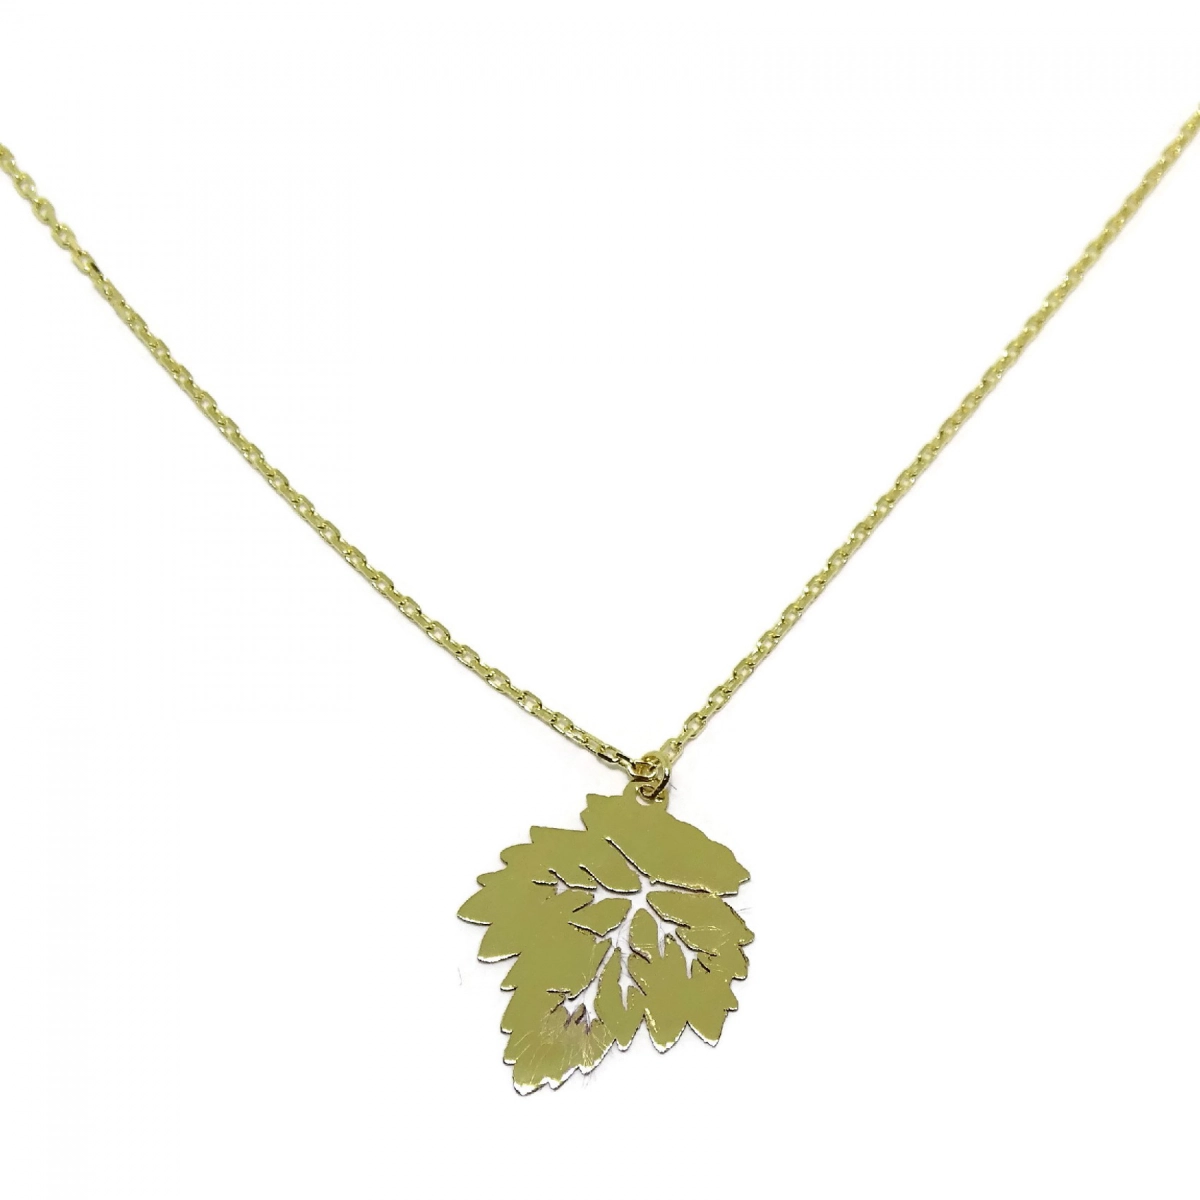 COLLAR YELLOW GOLD 18KTES A FIG LEAF. BABY YOU ARE MY ORIGINAL SIN! NEVER SAY NEVER